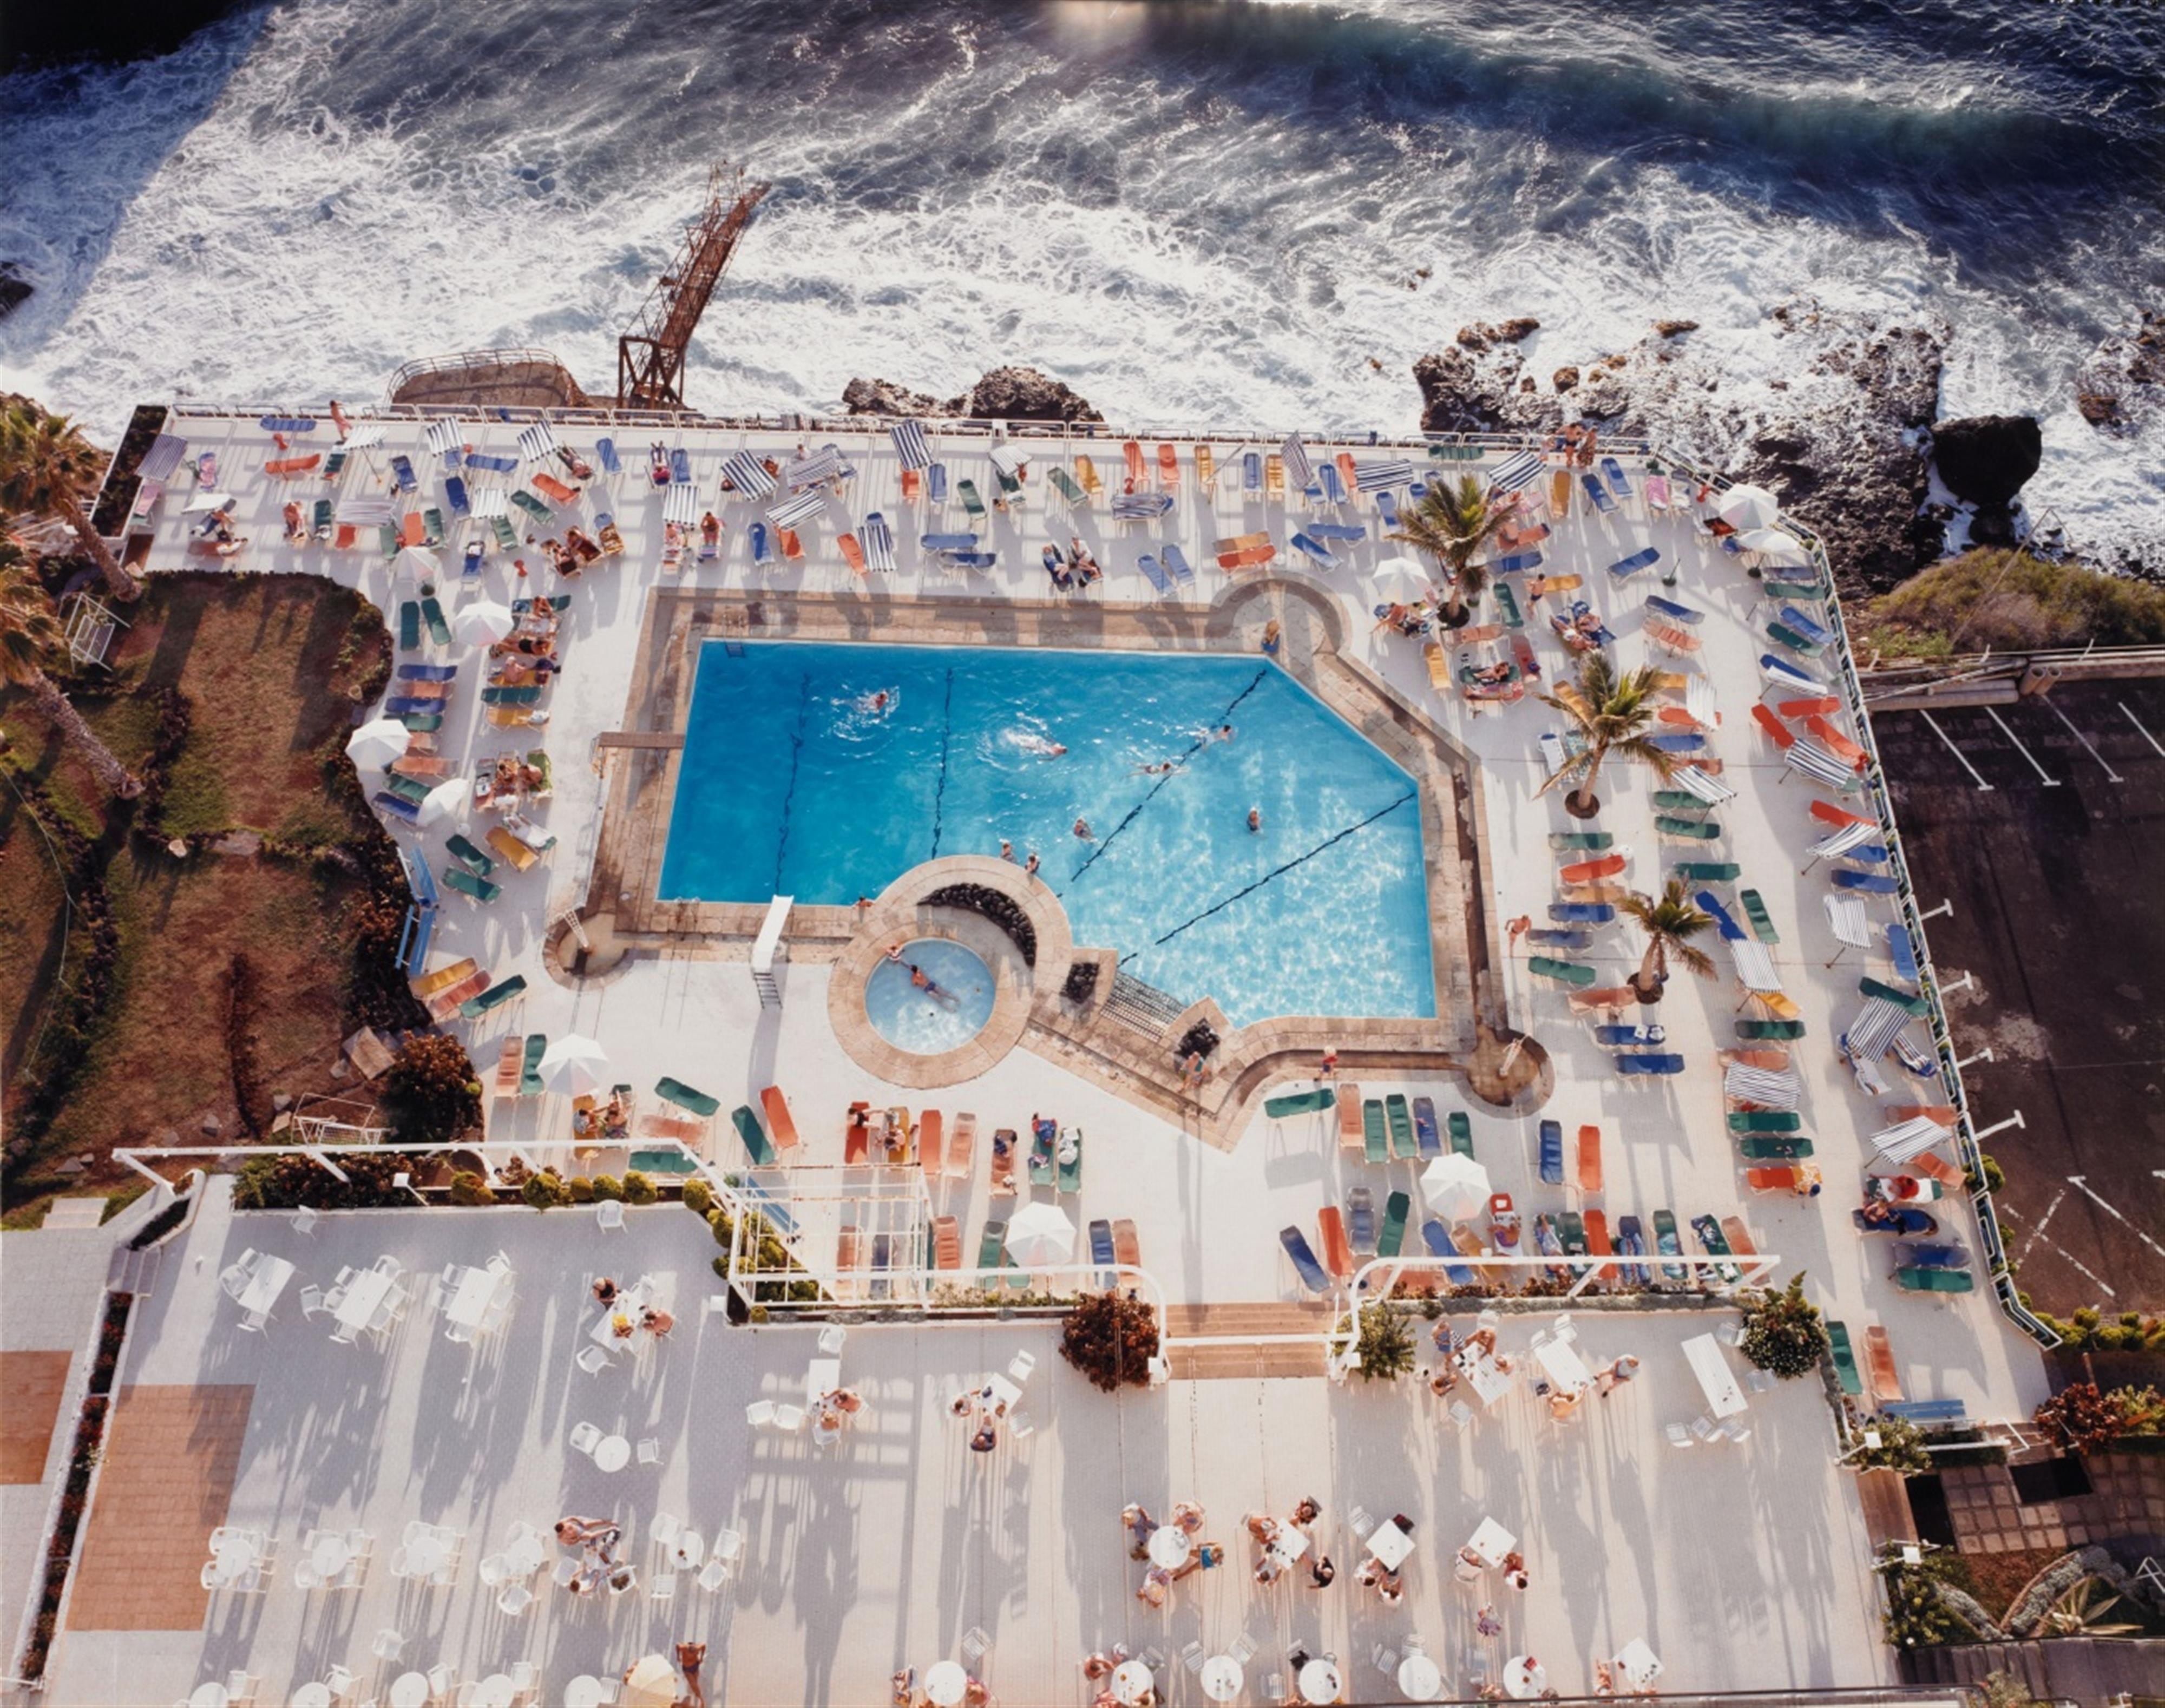 Andreas Gursky - Schwimmbad/Teneriffa - image-1